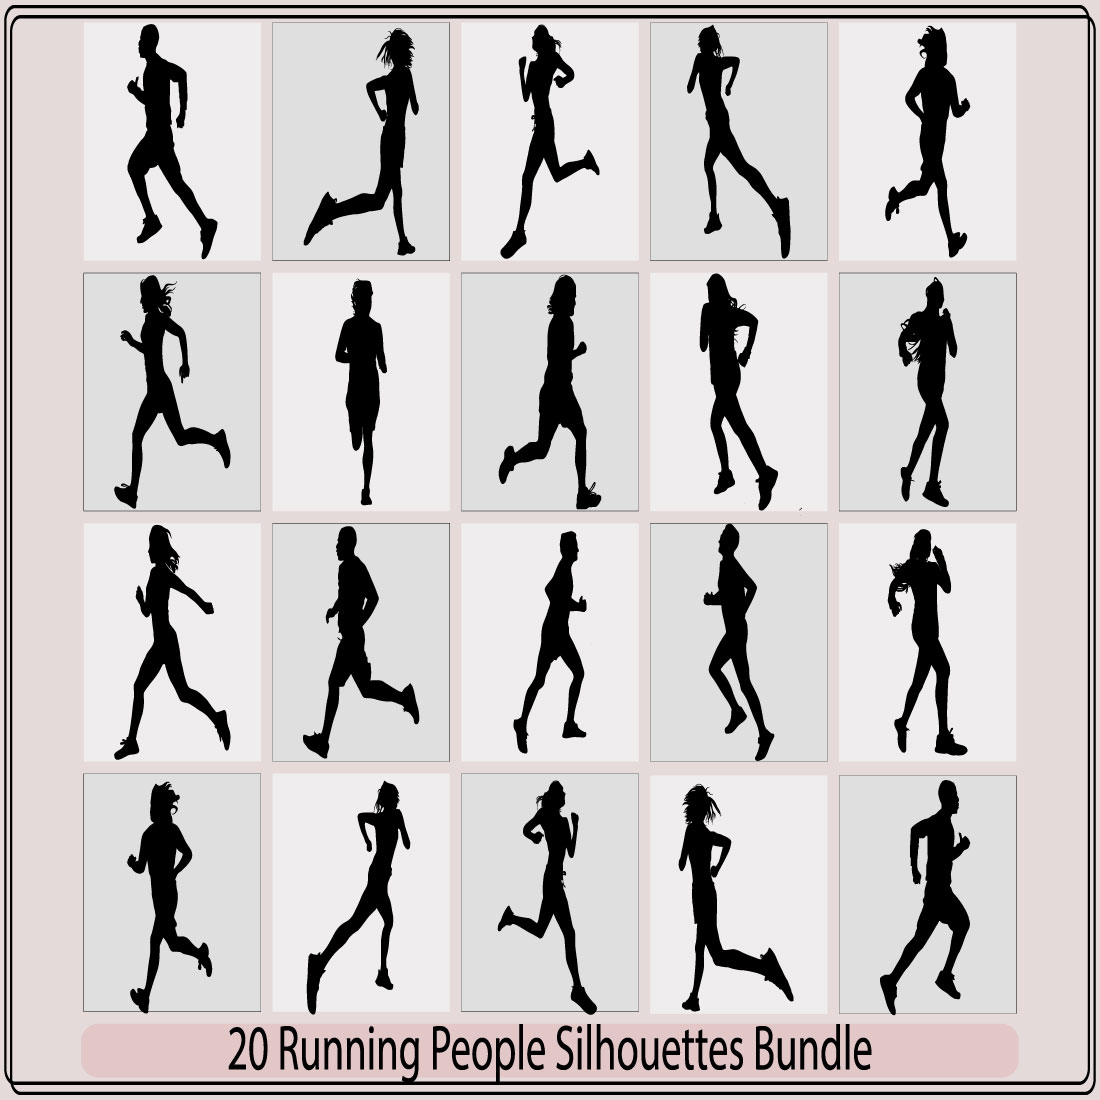 Running woman front view vector silhouette. Silhouette of a